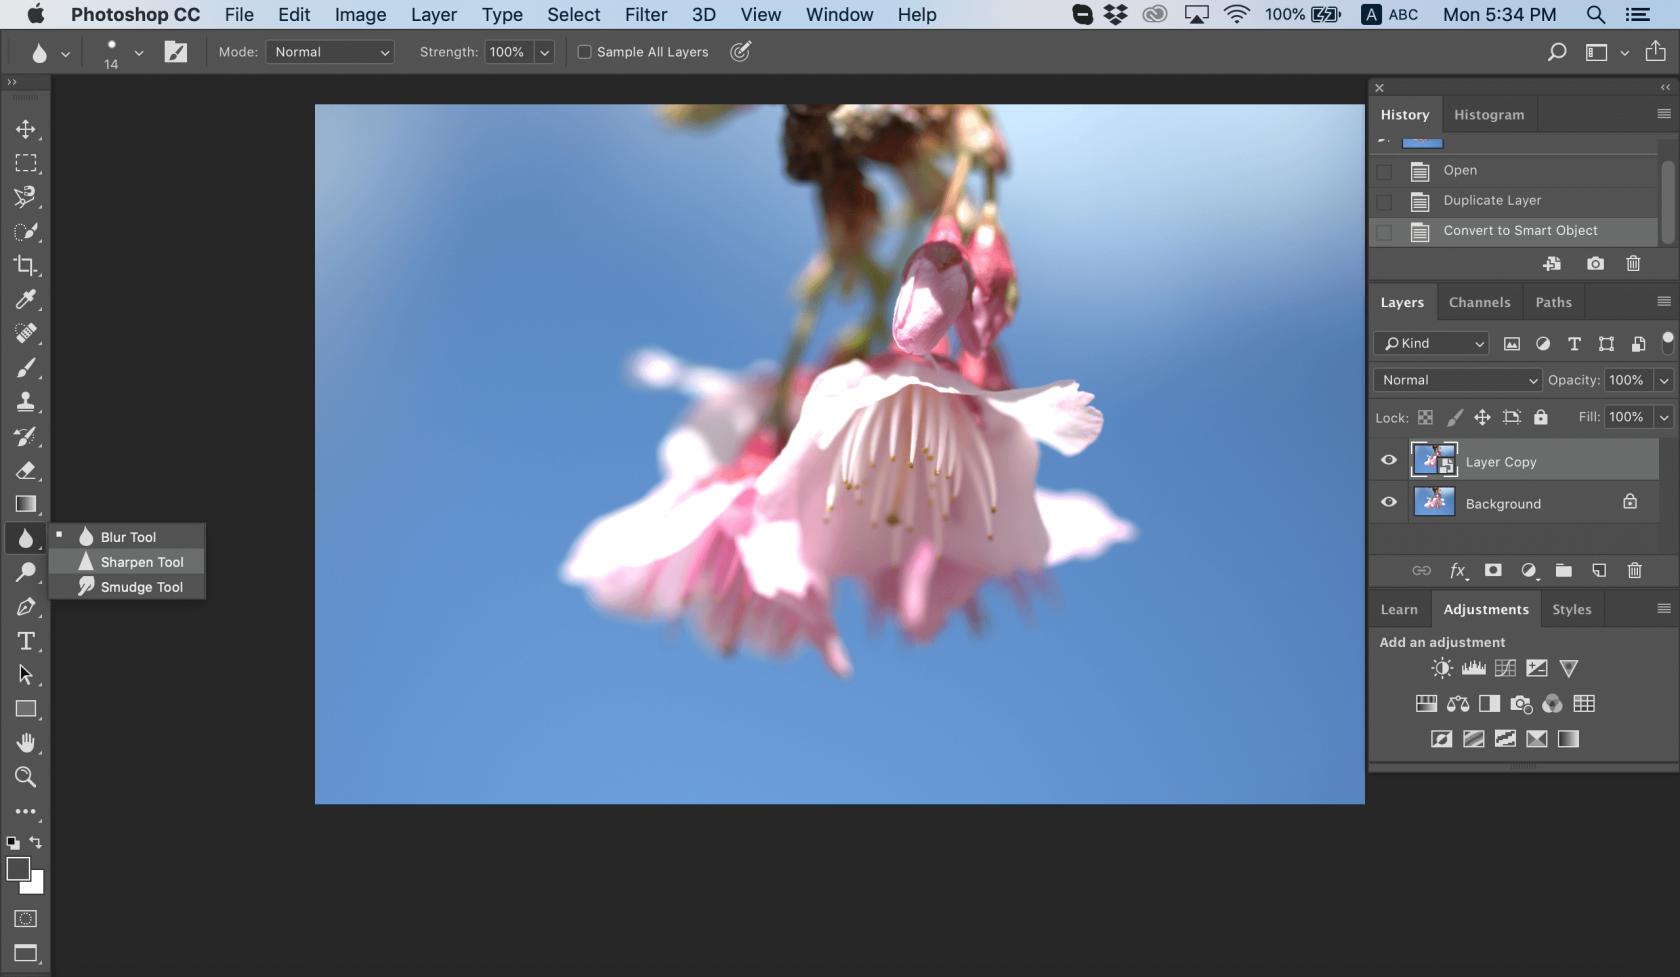 How to Remove Blur in Photoshop